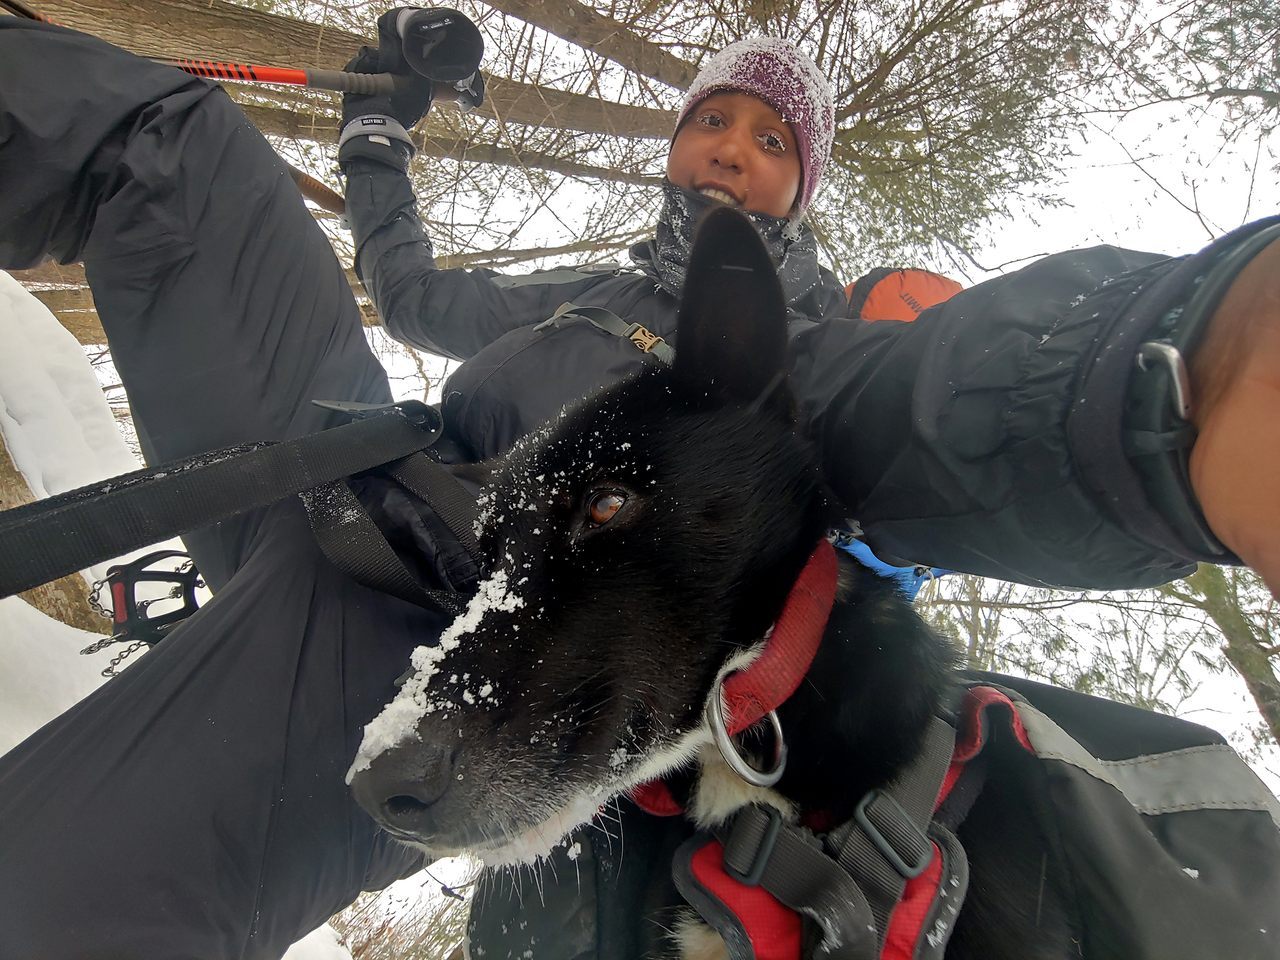 Hiker Emily Ford borrowed her friend's dog, a retired sled dog named Diggins, on her grueling hike on Wisconsin's Ice Age Trail.